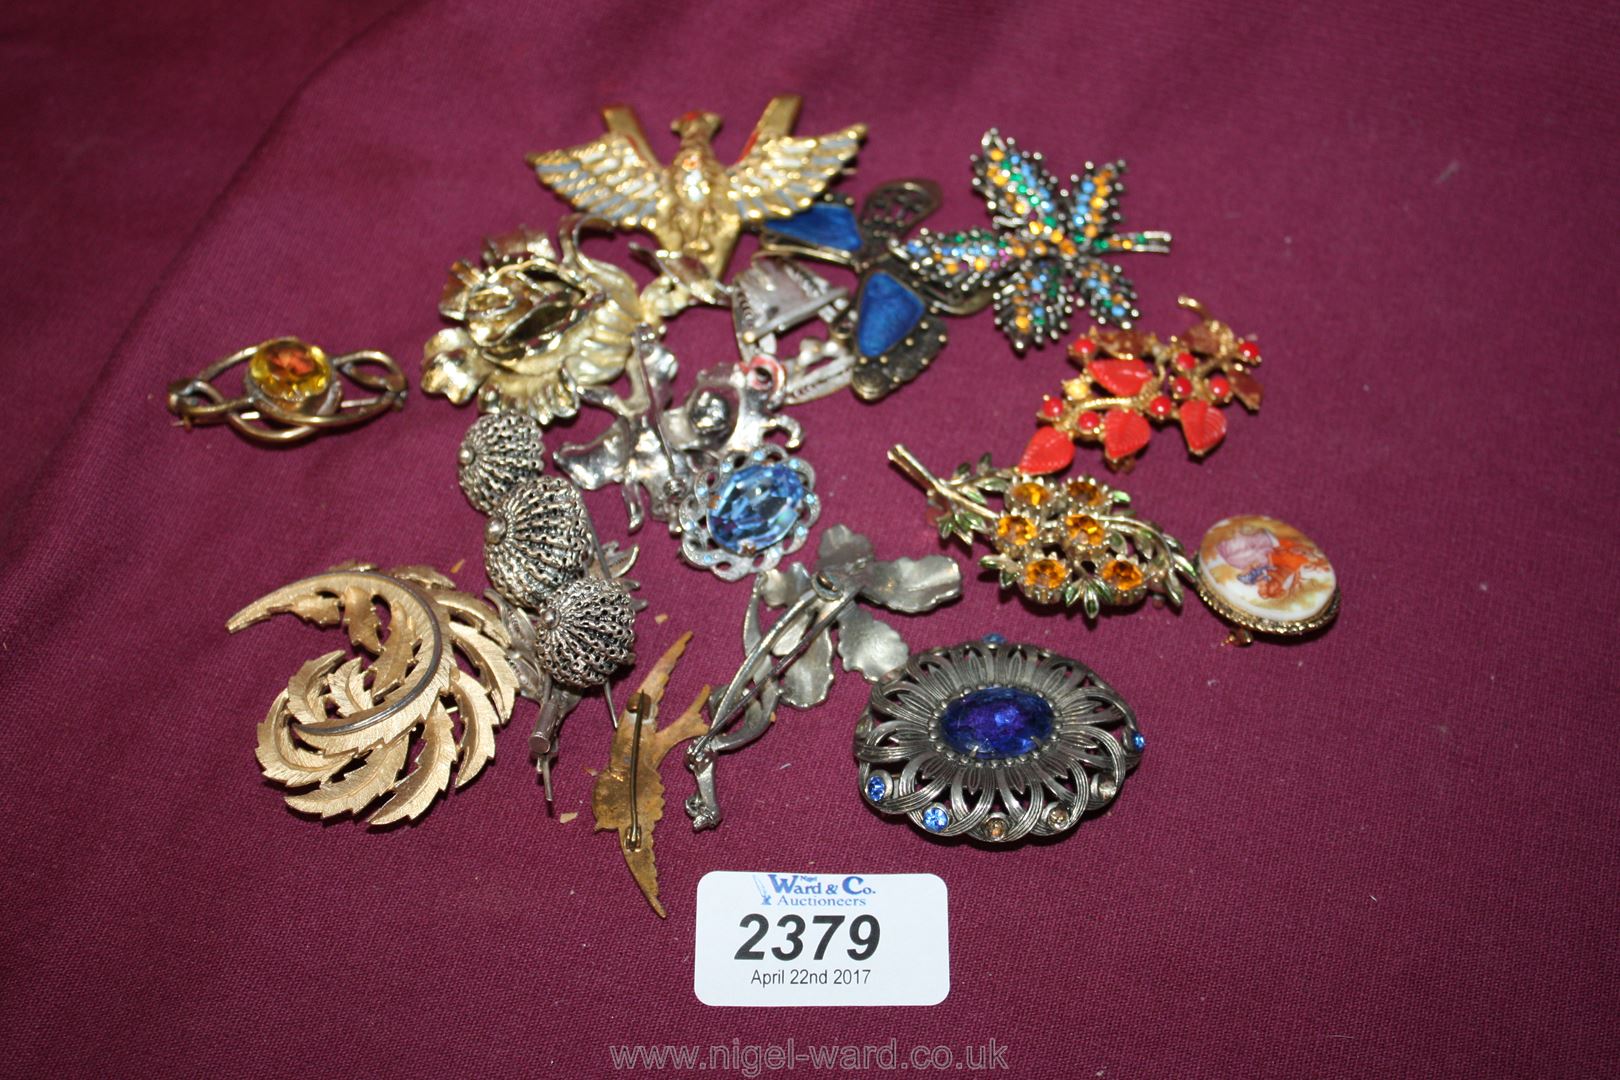 A quantity of costume Jewellery including brooches